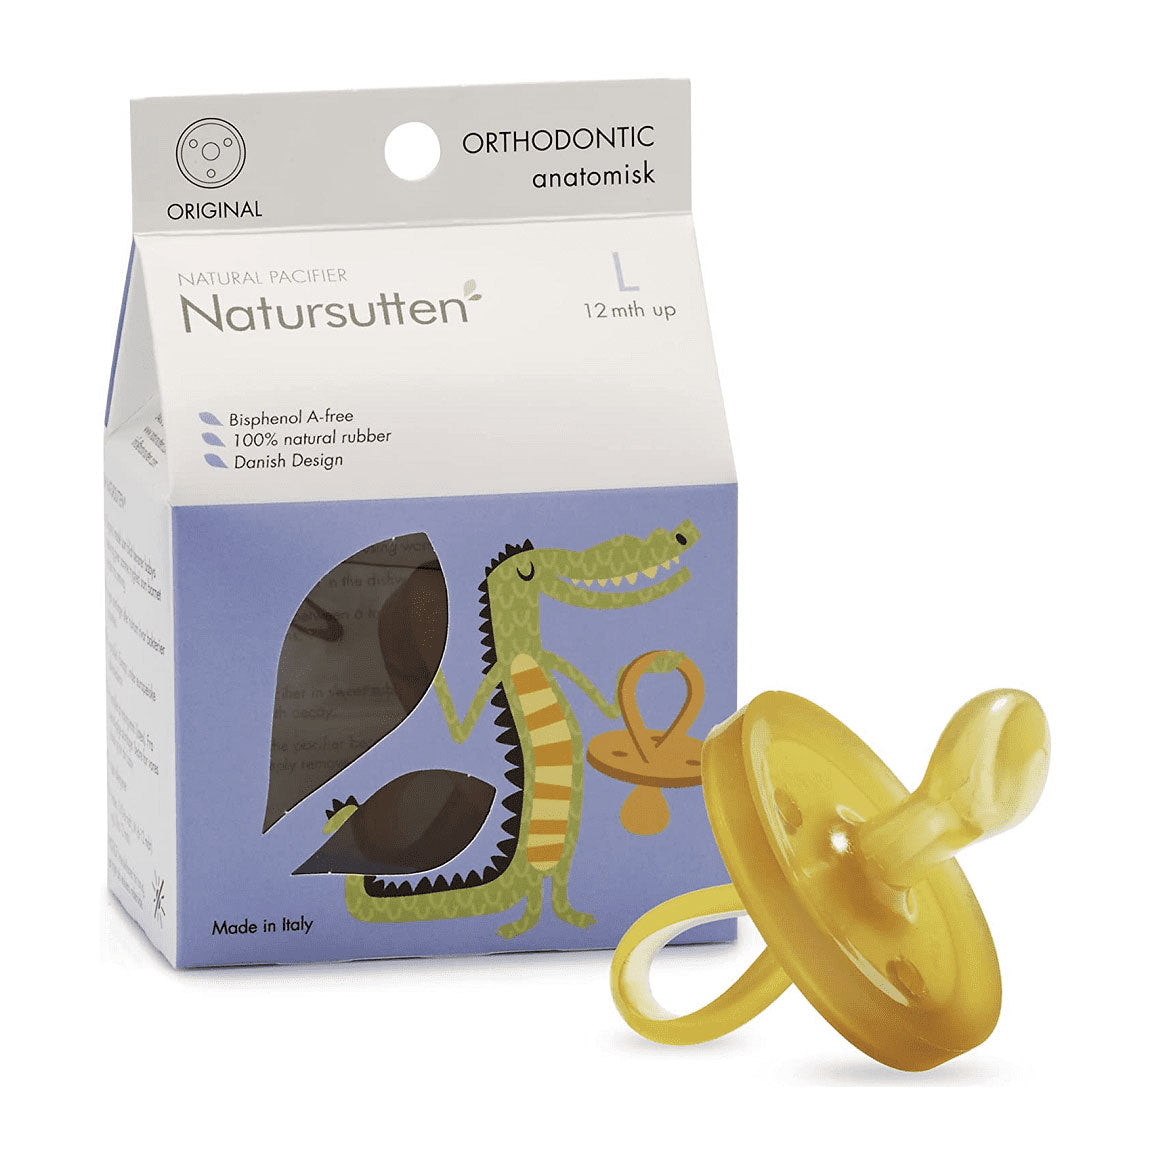 Made from pure, all-natural latex rubber from the Hevea Brasiliense tree, Natursutten pacifiers are softer than silicone and are extremely hygienic because they are molded in one piece